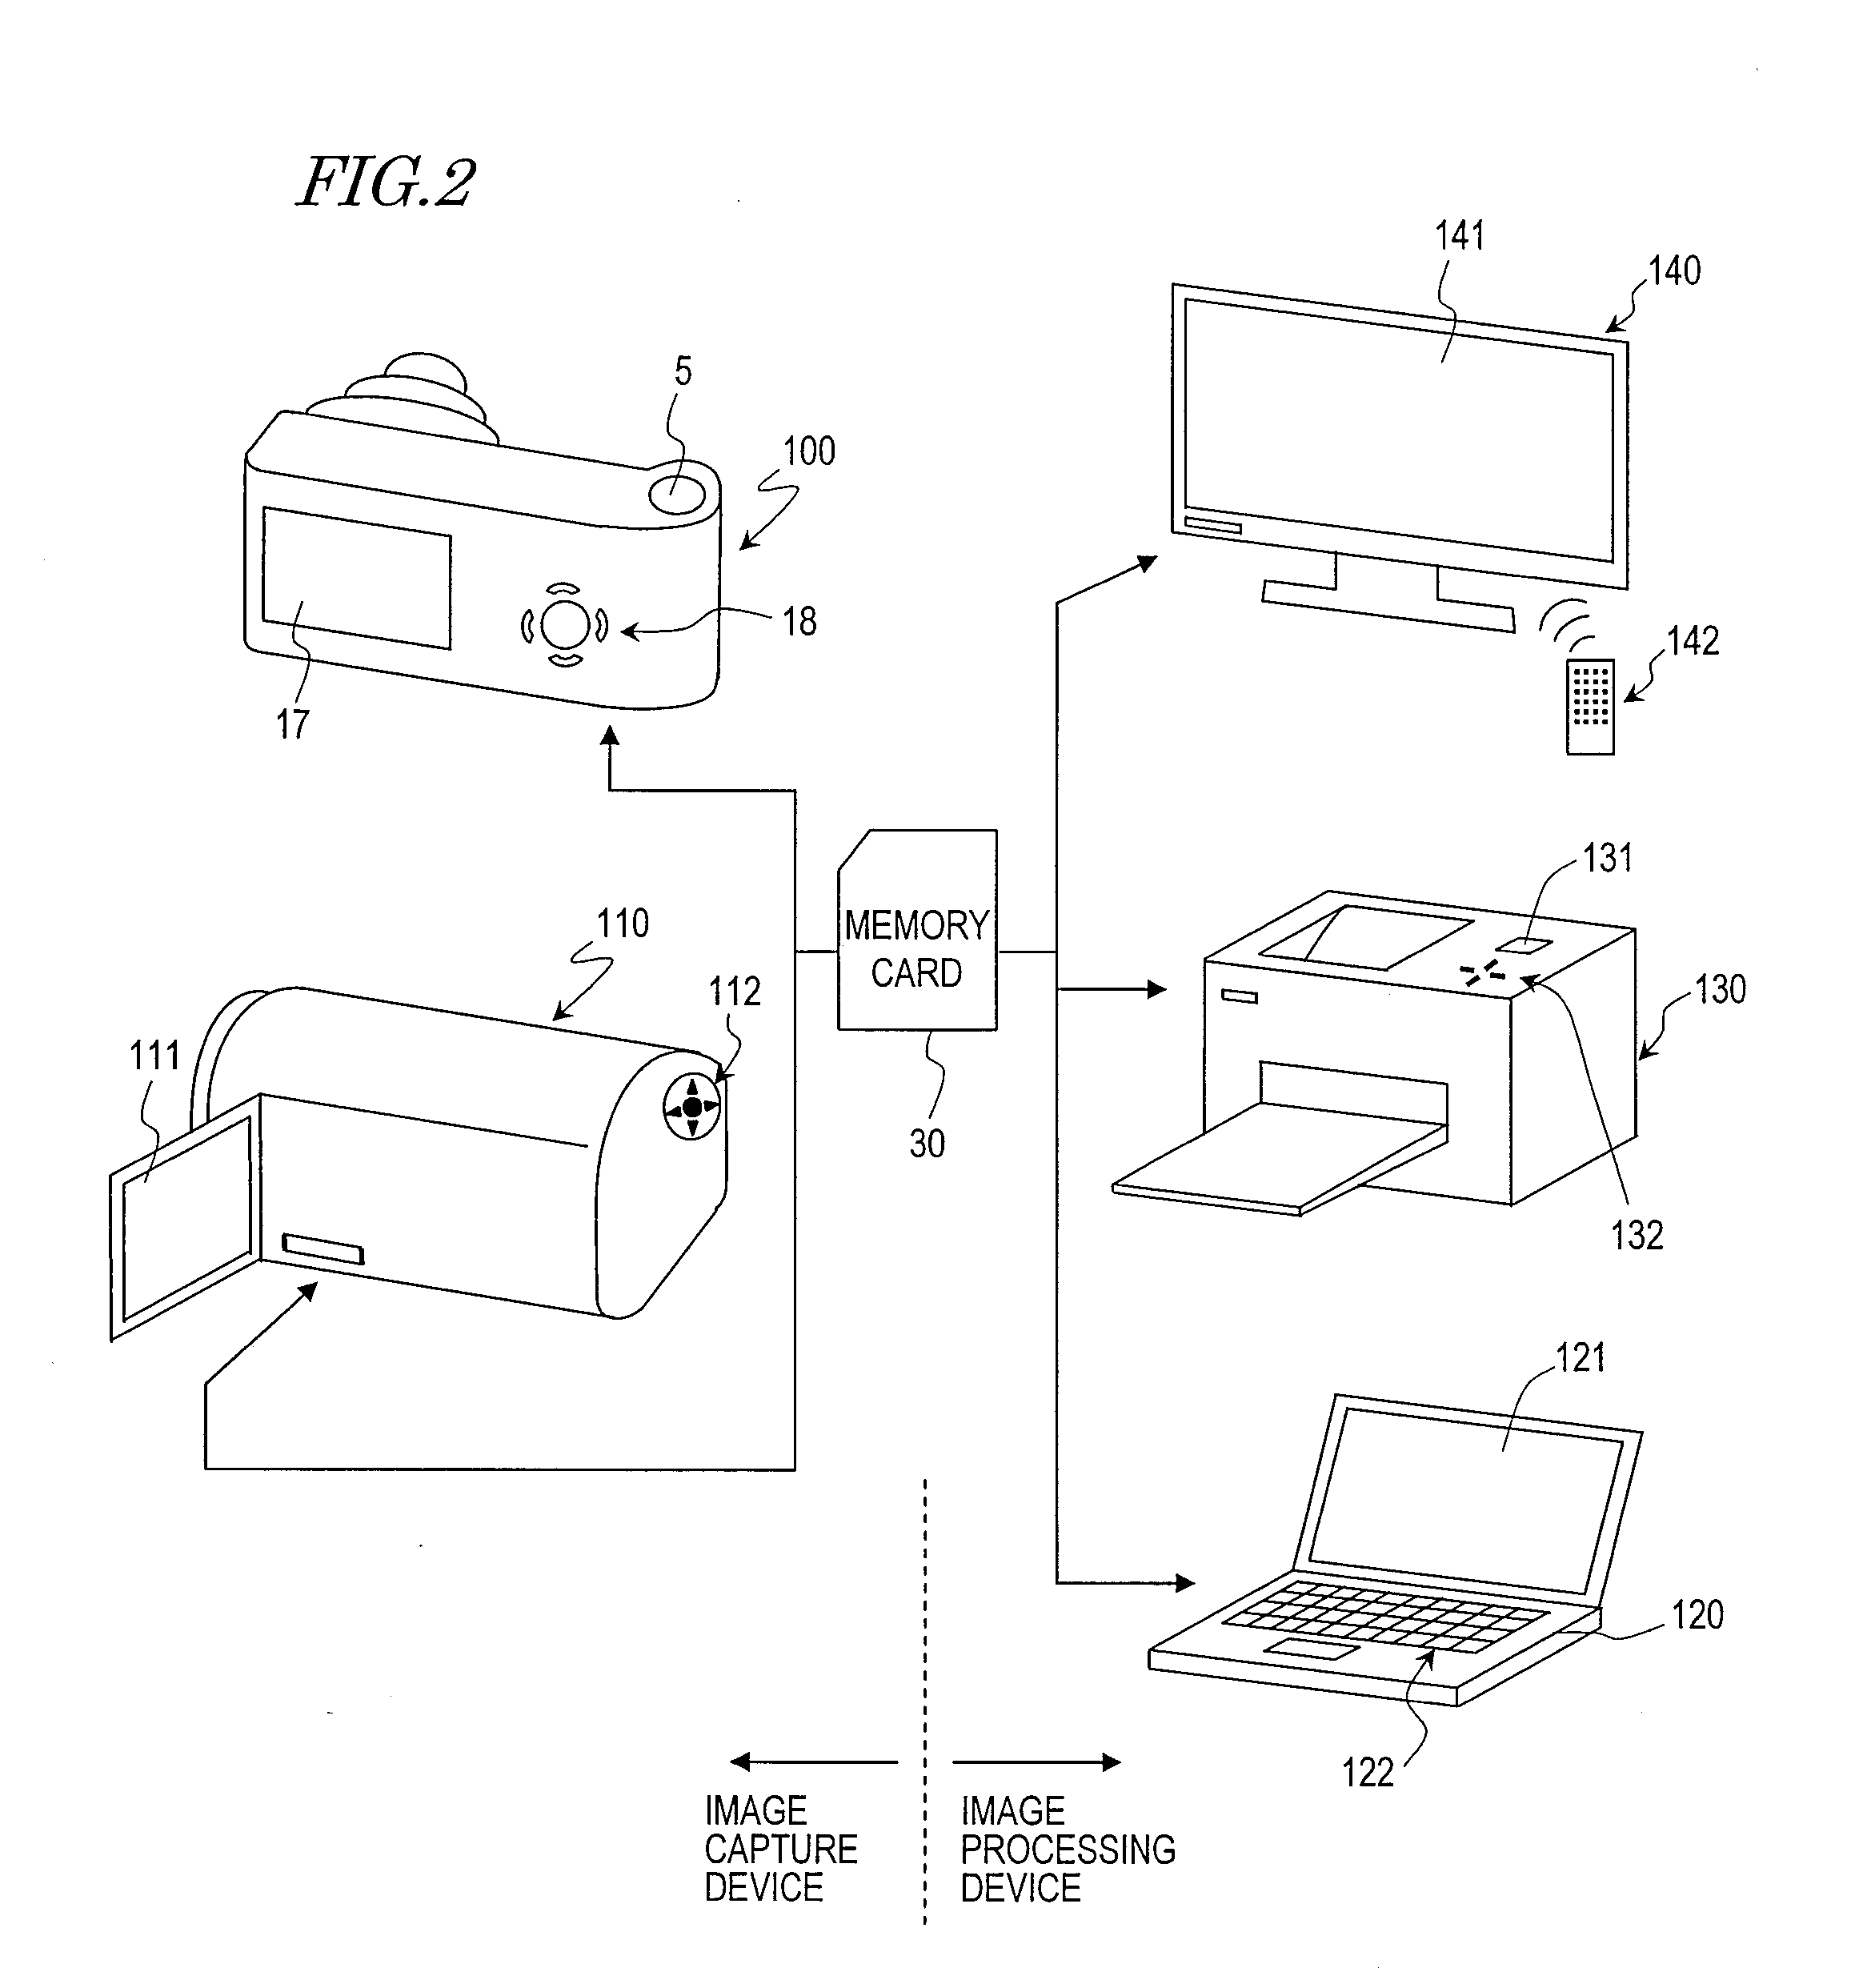 Image capture device and image processing device